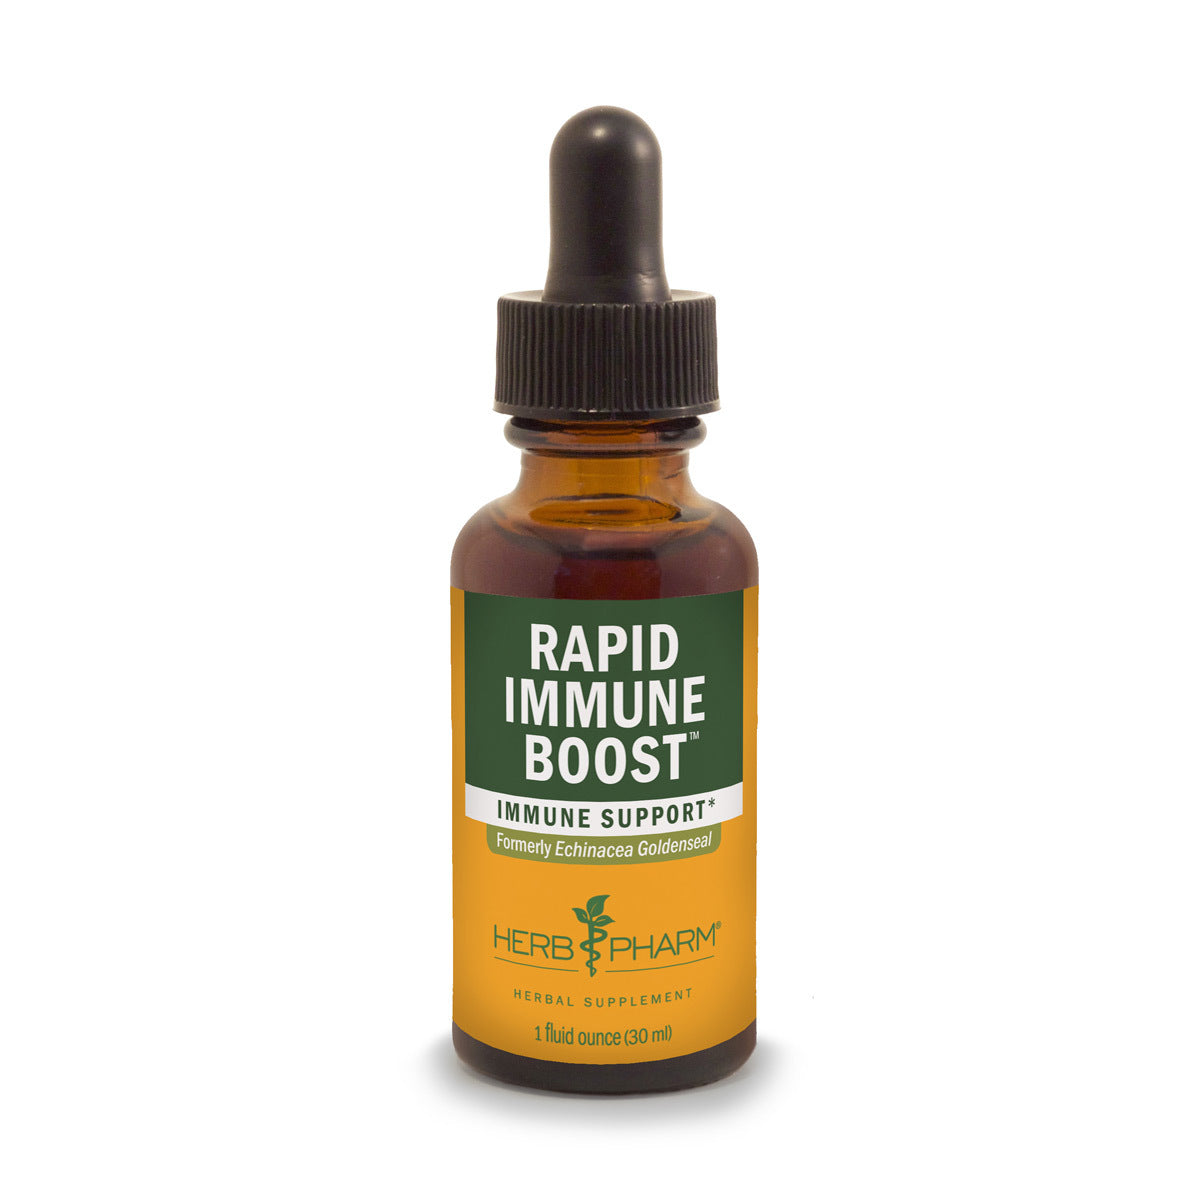 Primary image of Rapid Immune Boost Compound